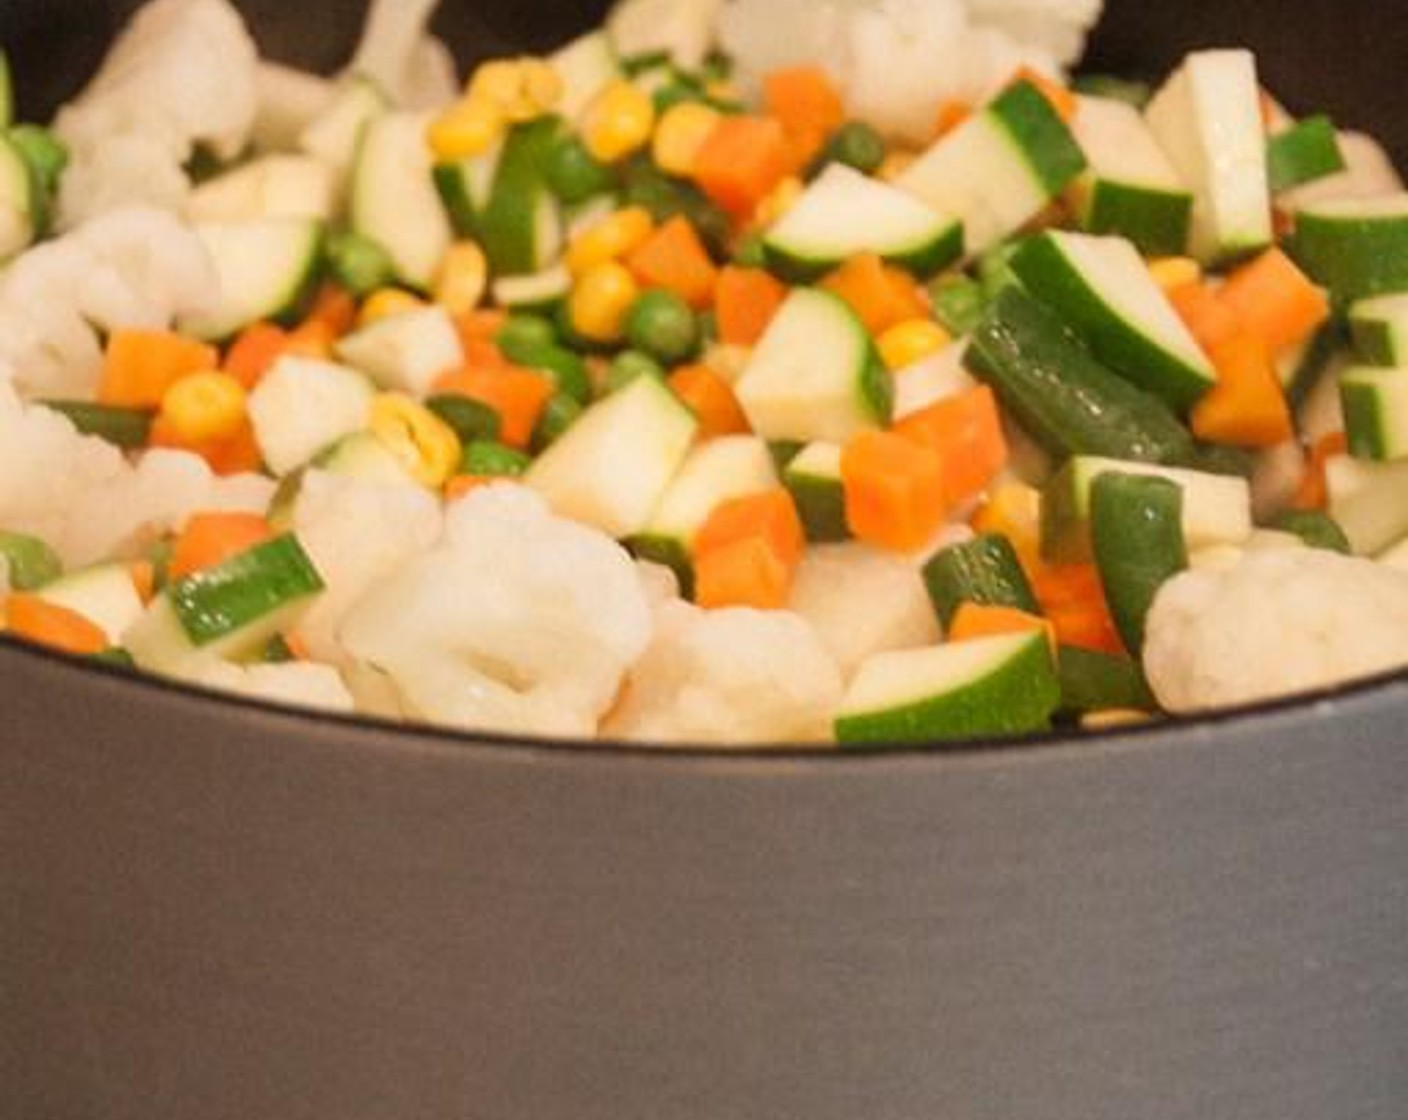 step 2 Cook the Cauliflower (4 cups), Frozen Mixed Vegetables (2 cups), Zucchini (3), and diced Red Potatoes (3) in water until soft. When they’re soft, mash the vegetables well, in the liquid. Stir in the cooked lentils.